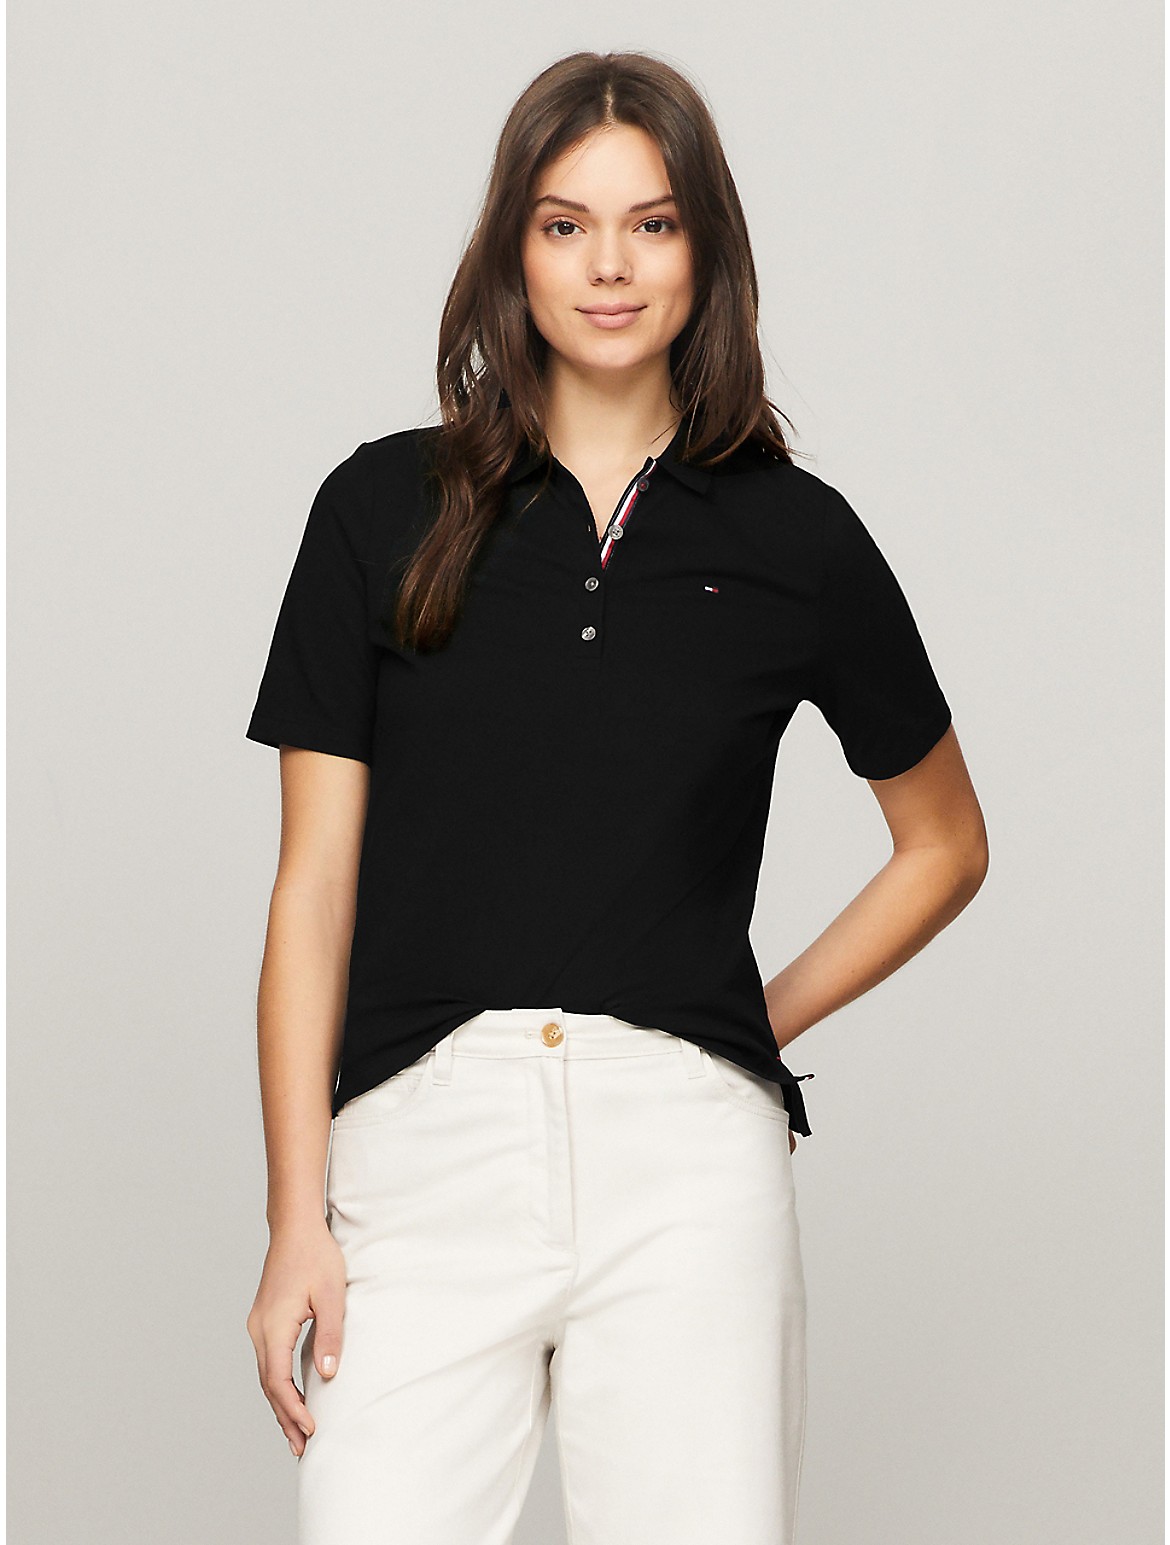 Tommy Hilfiger Women's Solid Stretch Cotton Polo